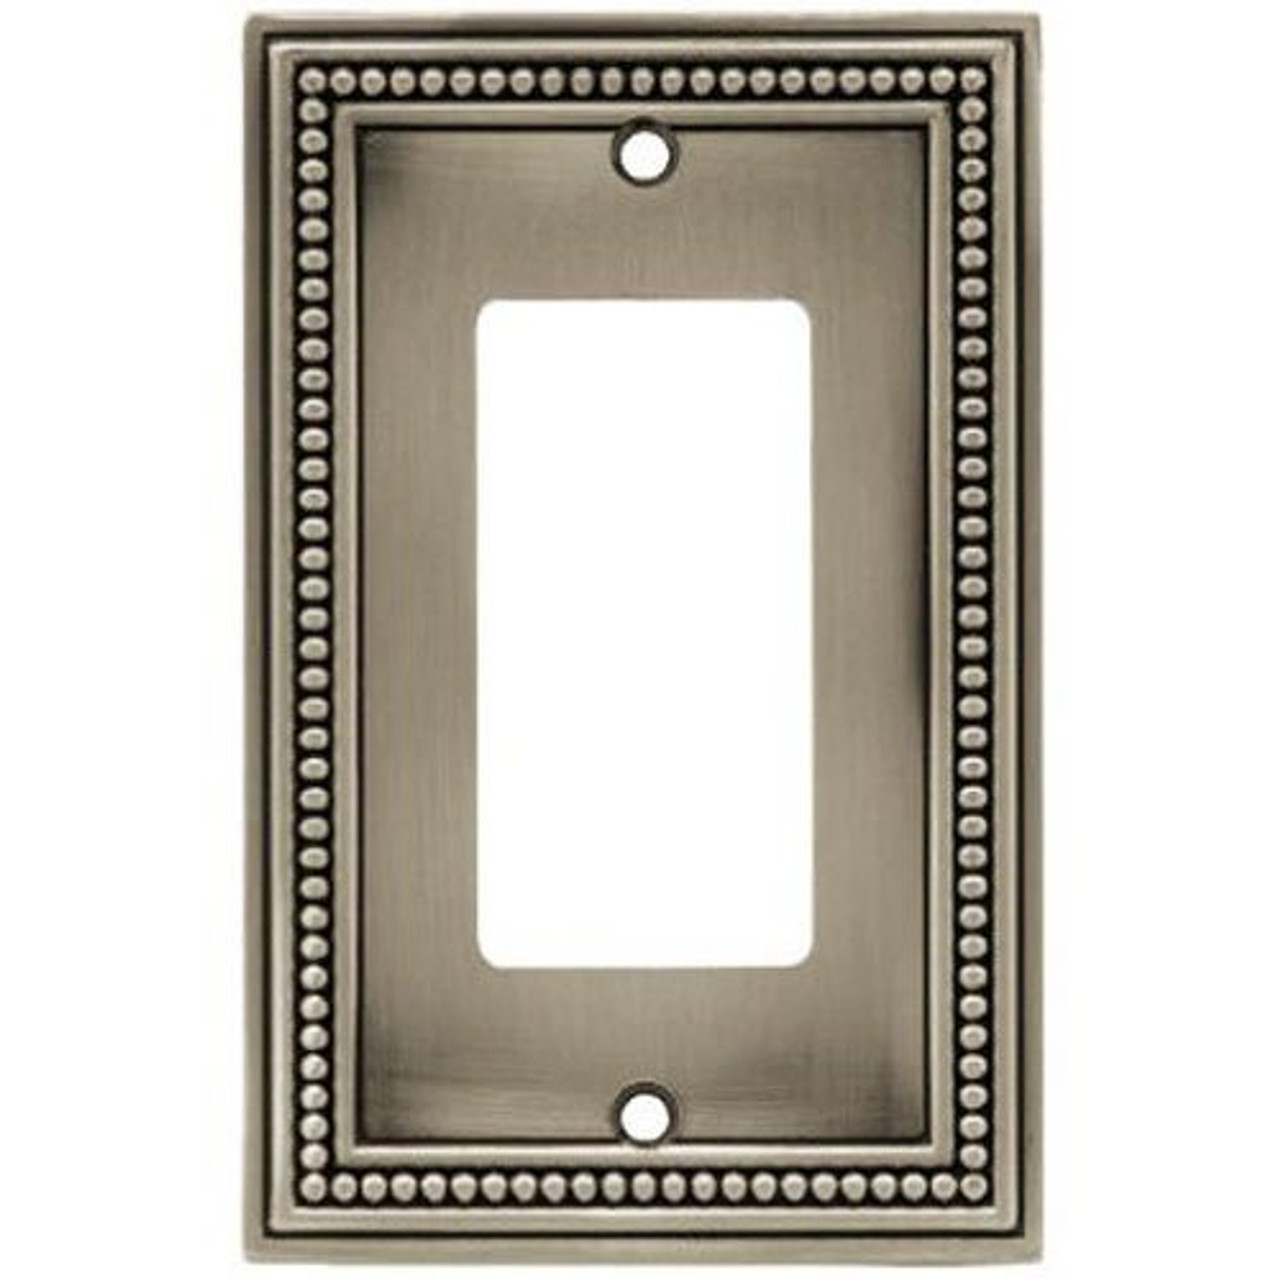 Brainerd W10237-BSP Brushed Satin Pewter Beaded Single GFCI Cover Plate